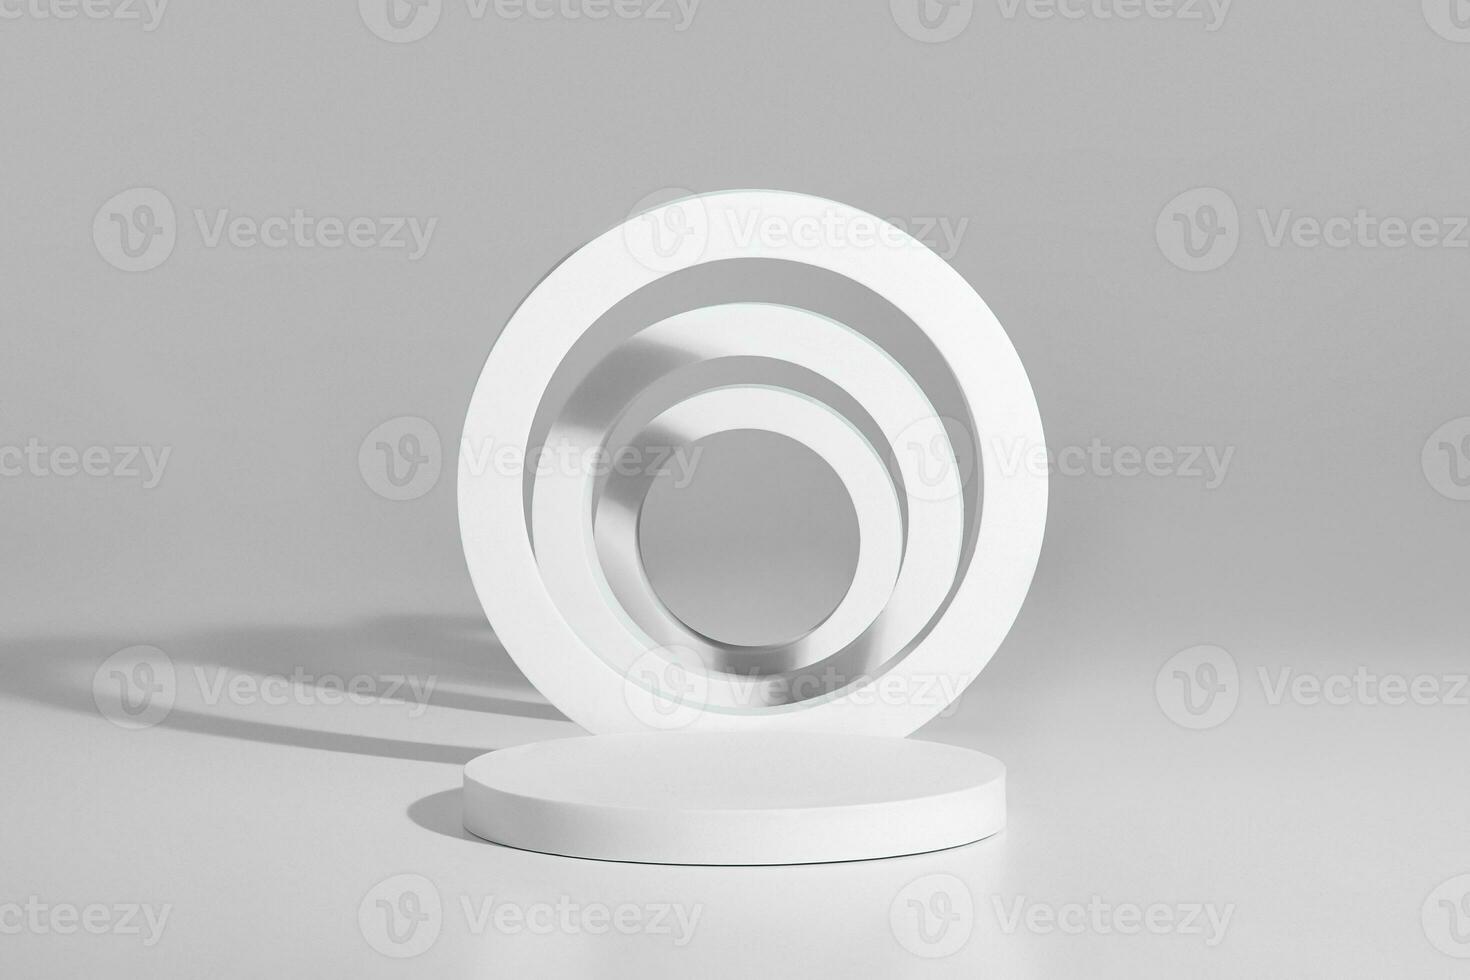 Product podium from cylindrical pedestal with vertical rings on gray background photo